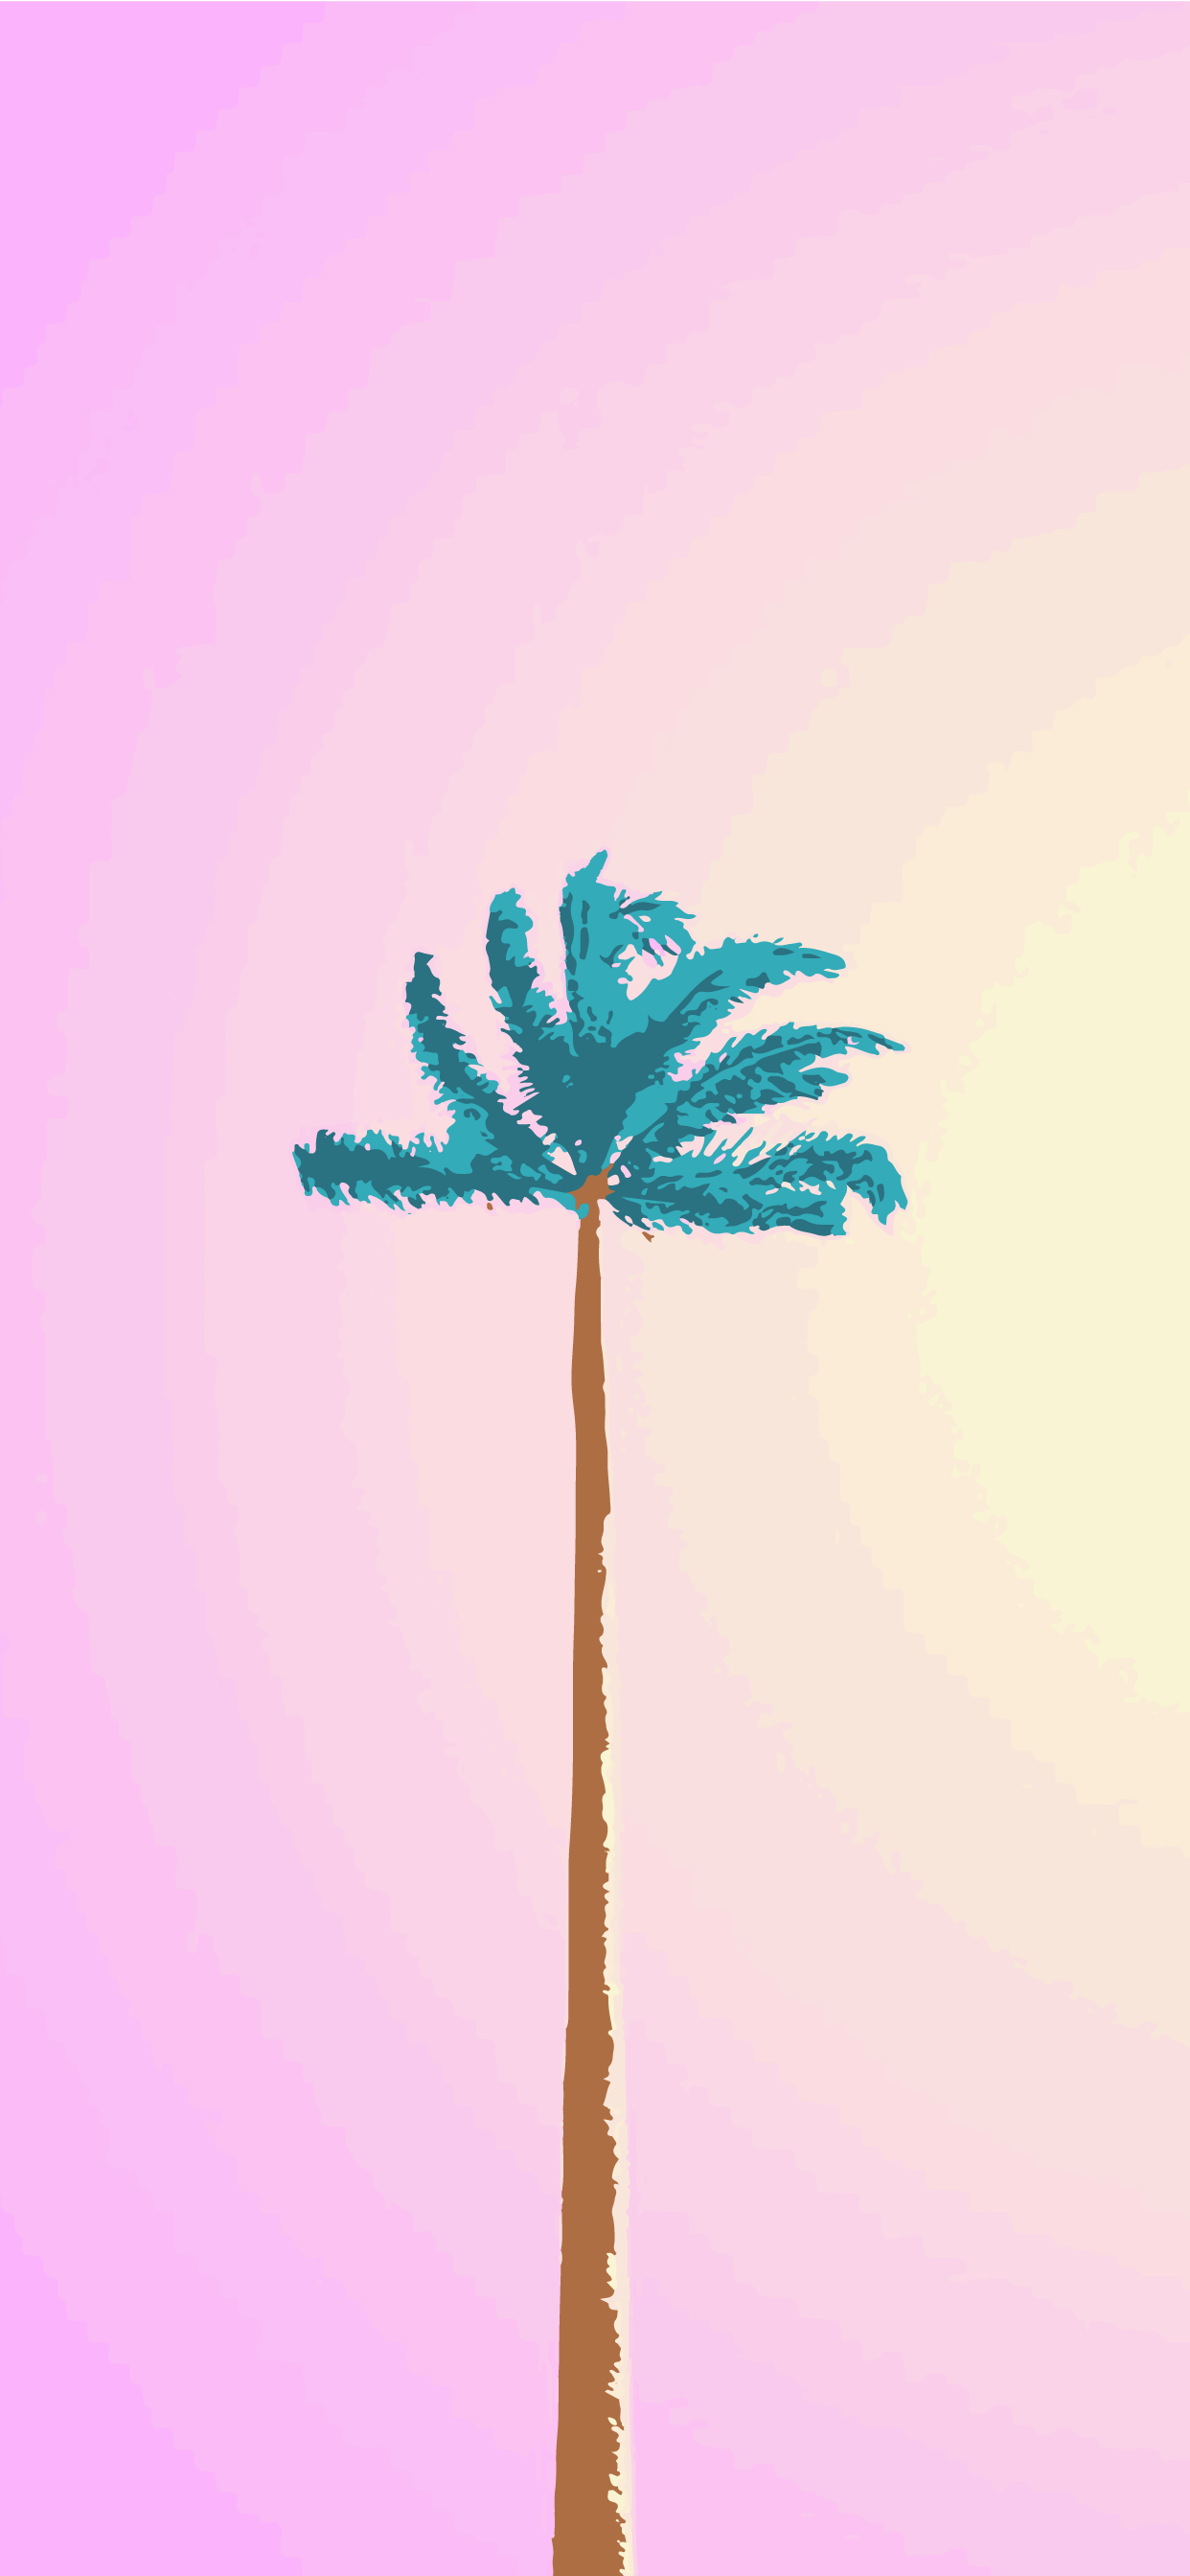 A painting of palm tree on pink background - Preppy, palm tree